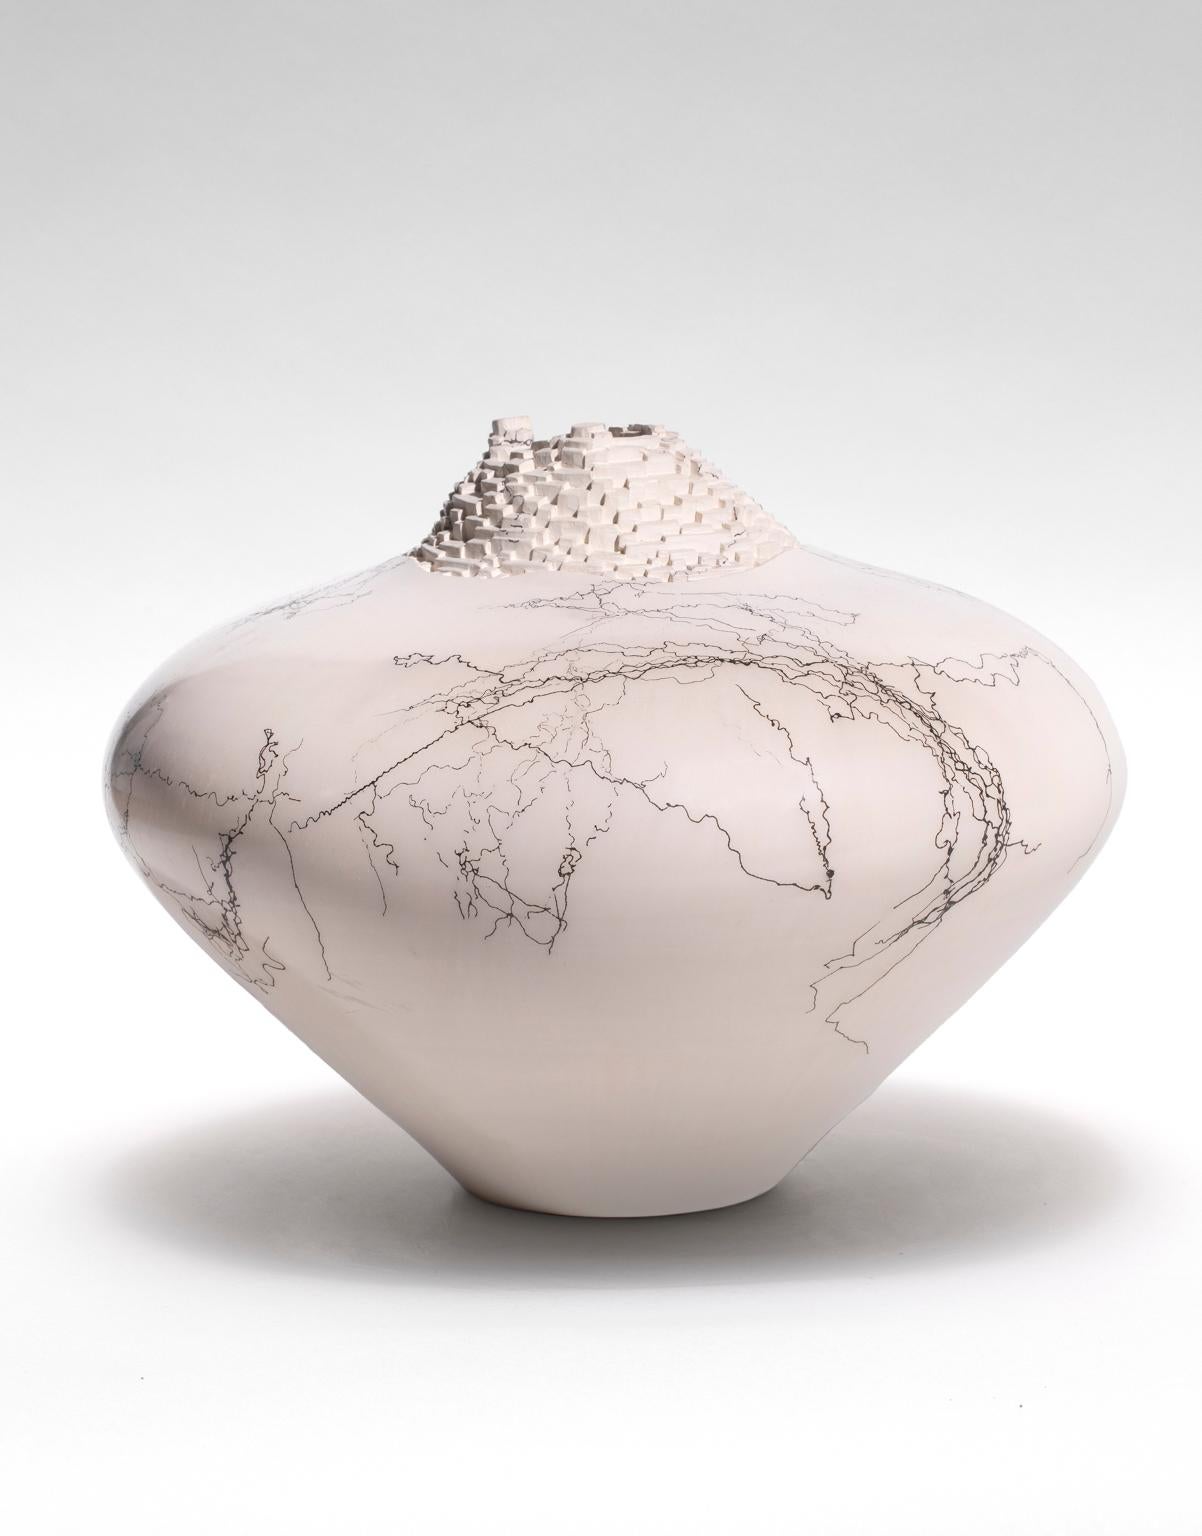 Jeff Margolin is a self-taught artist who works with a porcelain-type clay that is thrown or sculpted into forms with areas left for carving. They have a hefty yet delicate appearance and are quite lite in weight. The sculpted neck gives a nice